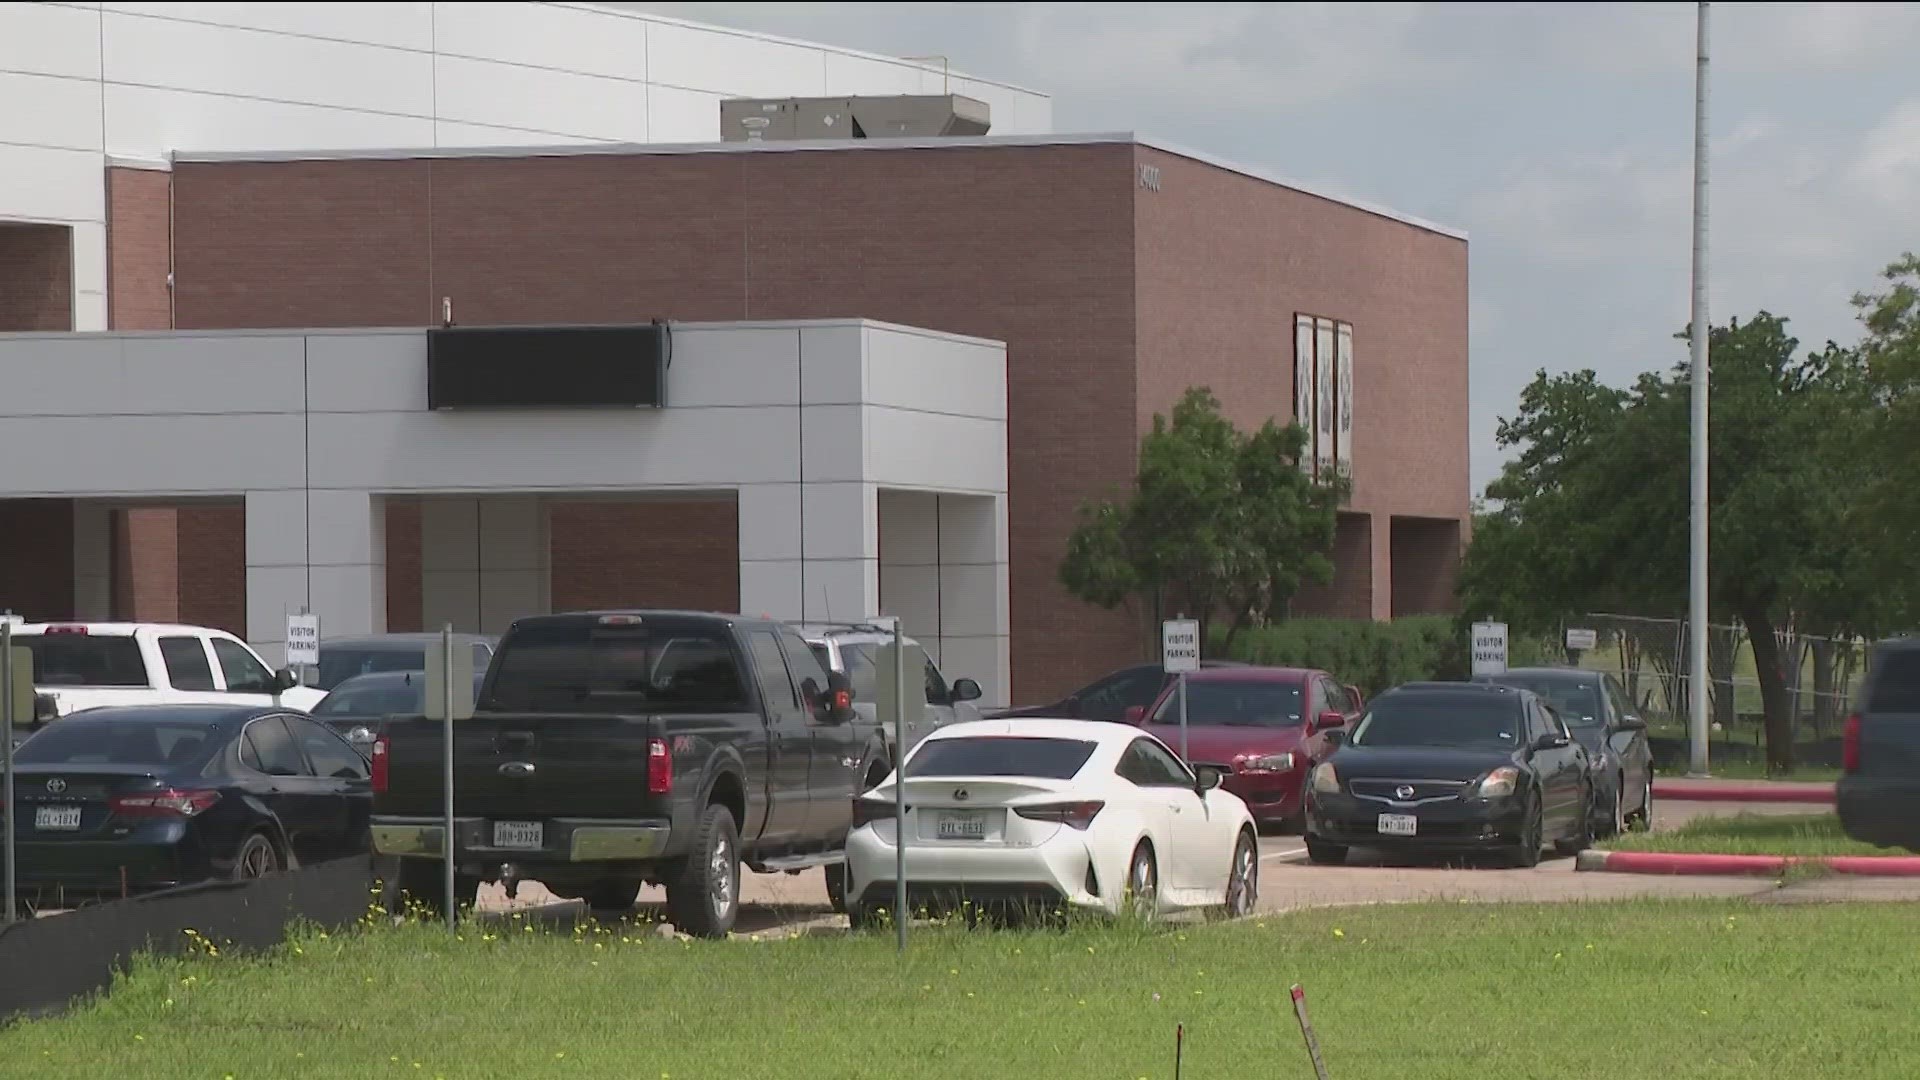 Elgin High School is making security changes after a fight broke out Monday during school.